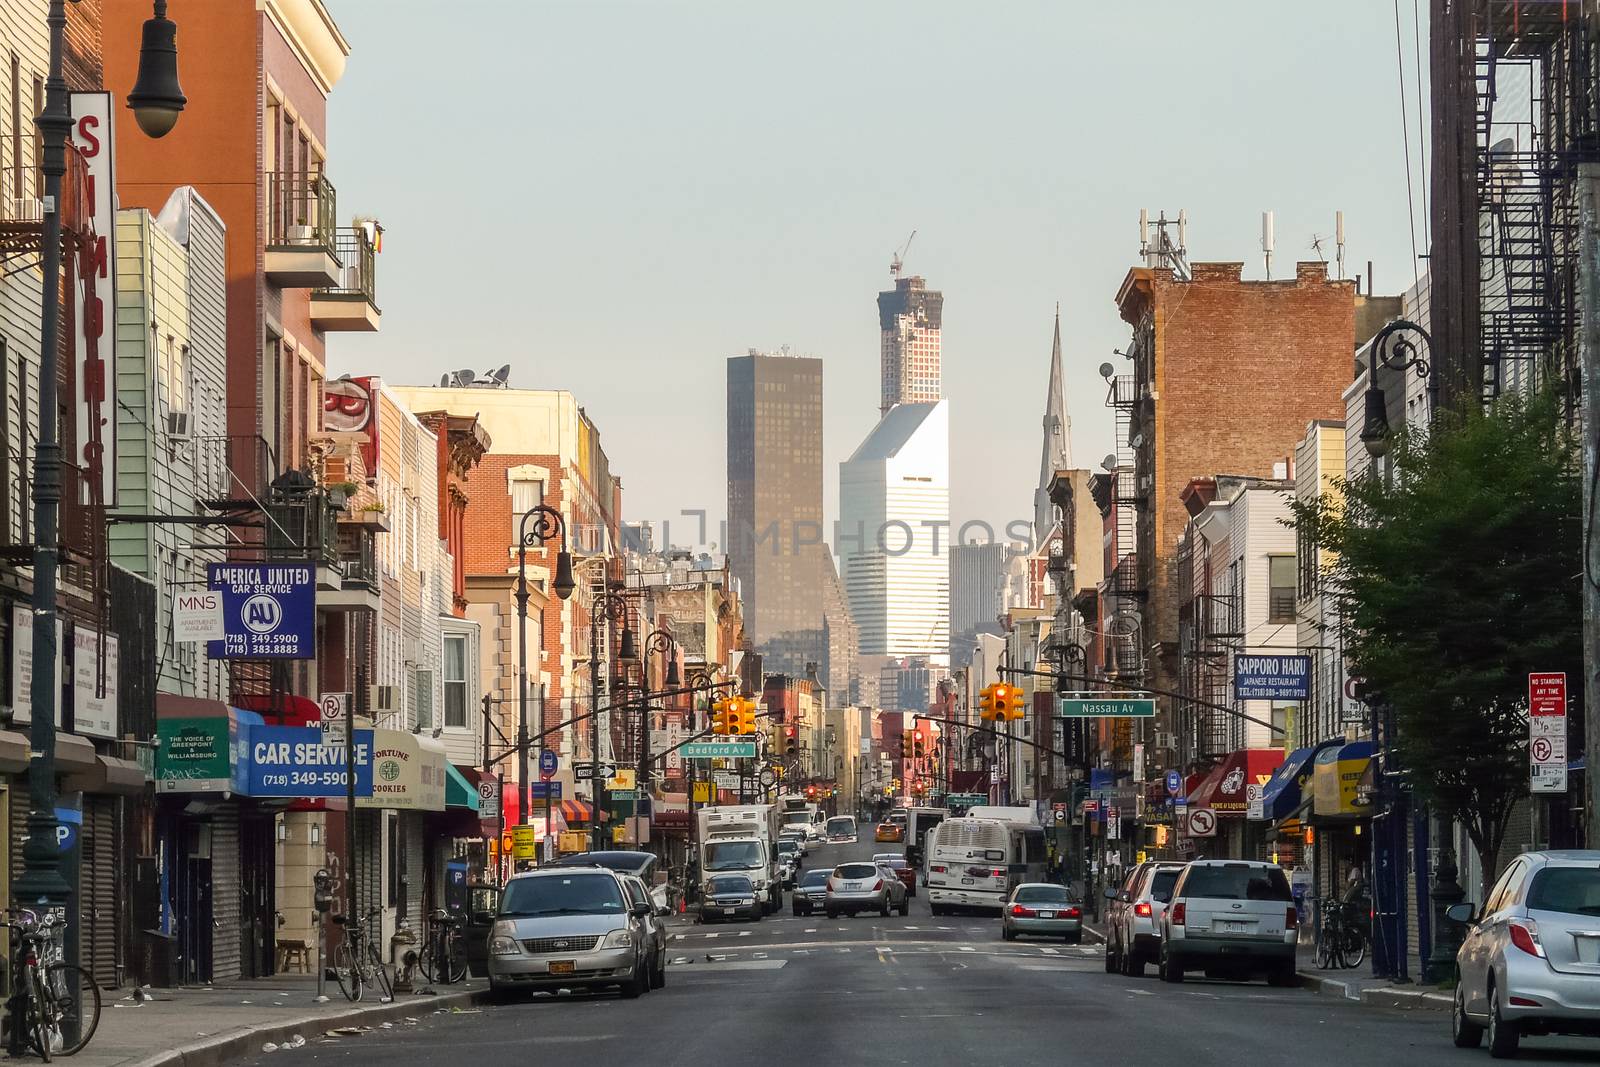 Brooklyn, New York - August 16, 2014: Greenpoint's Manhattan Ave with Manhattan skyscrapers.